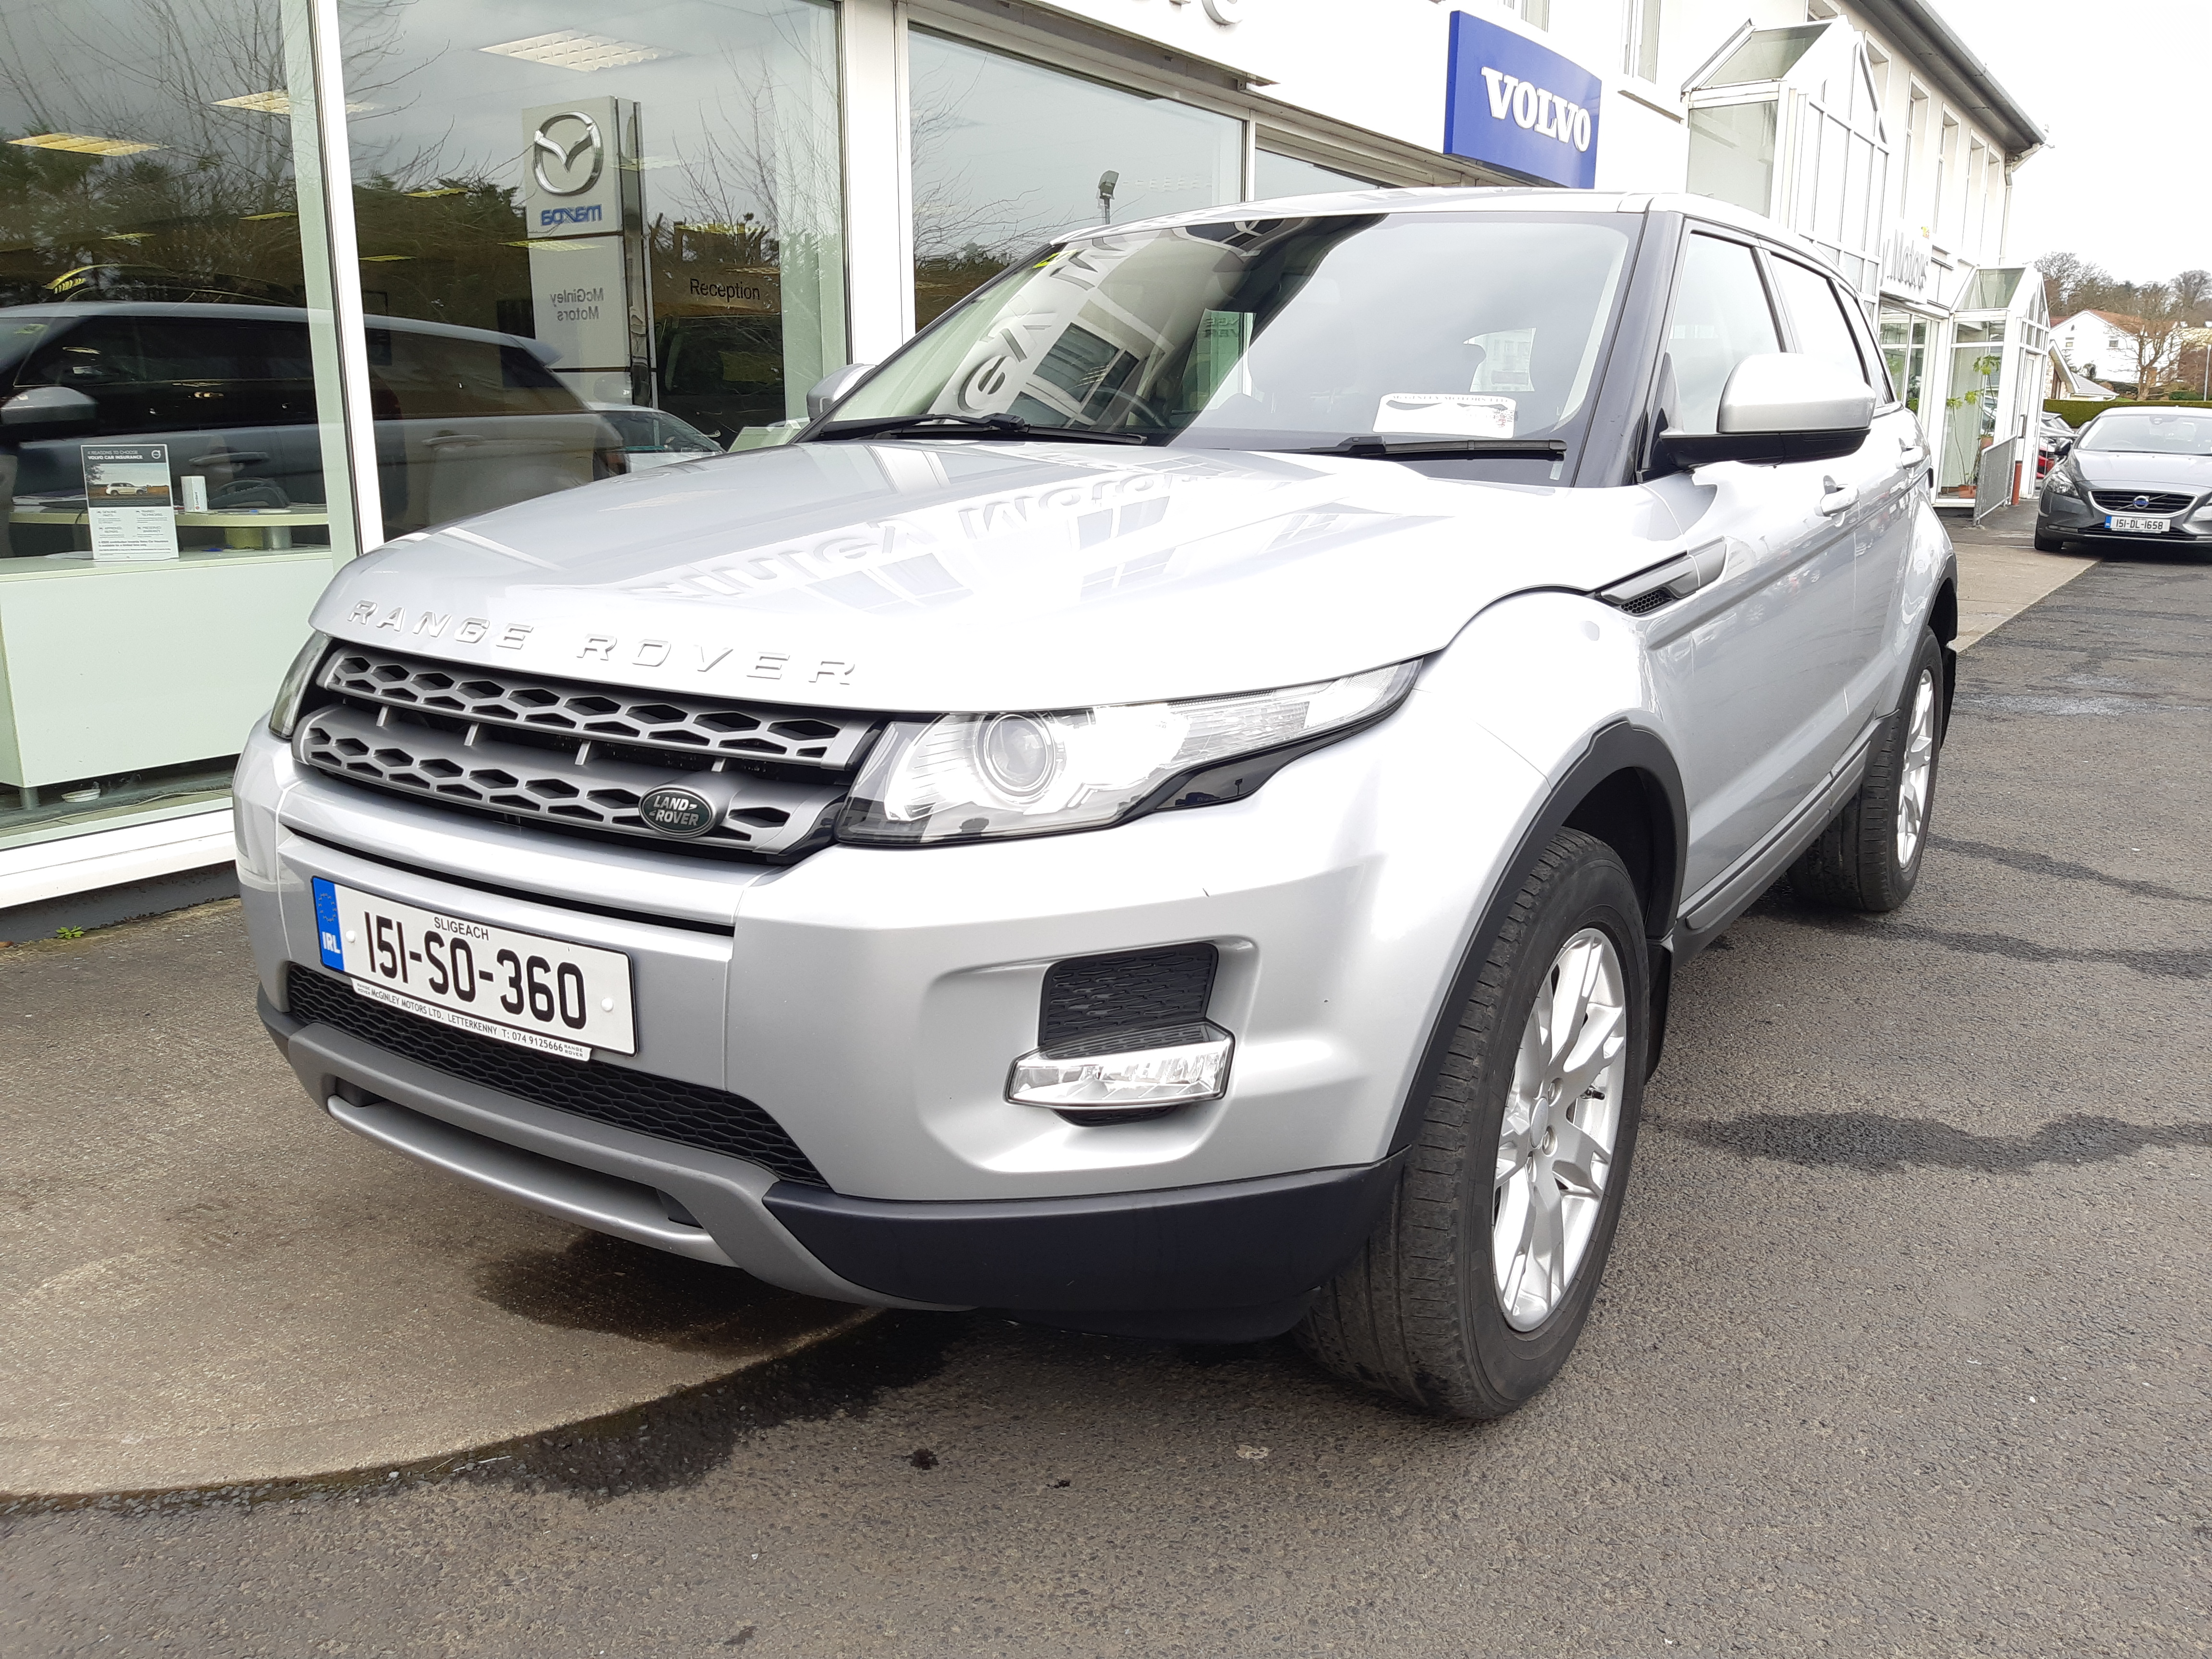 Land Rover Range Rover Evoque Convertible suv restyling